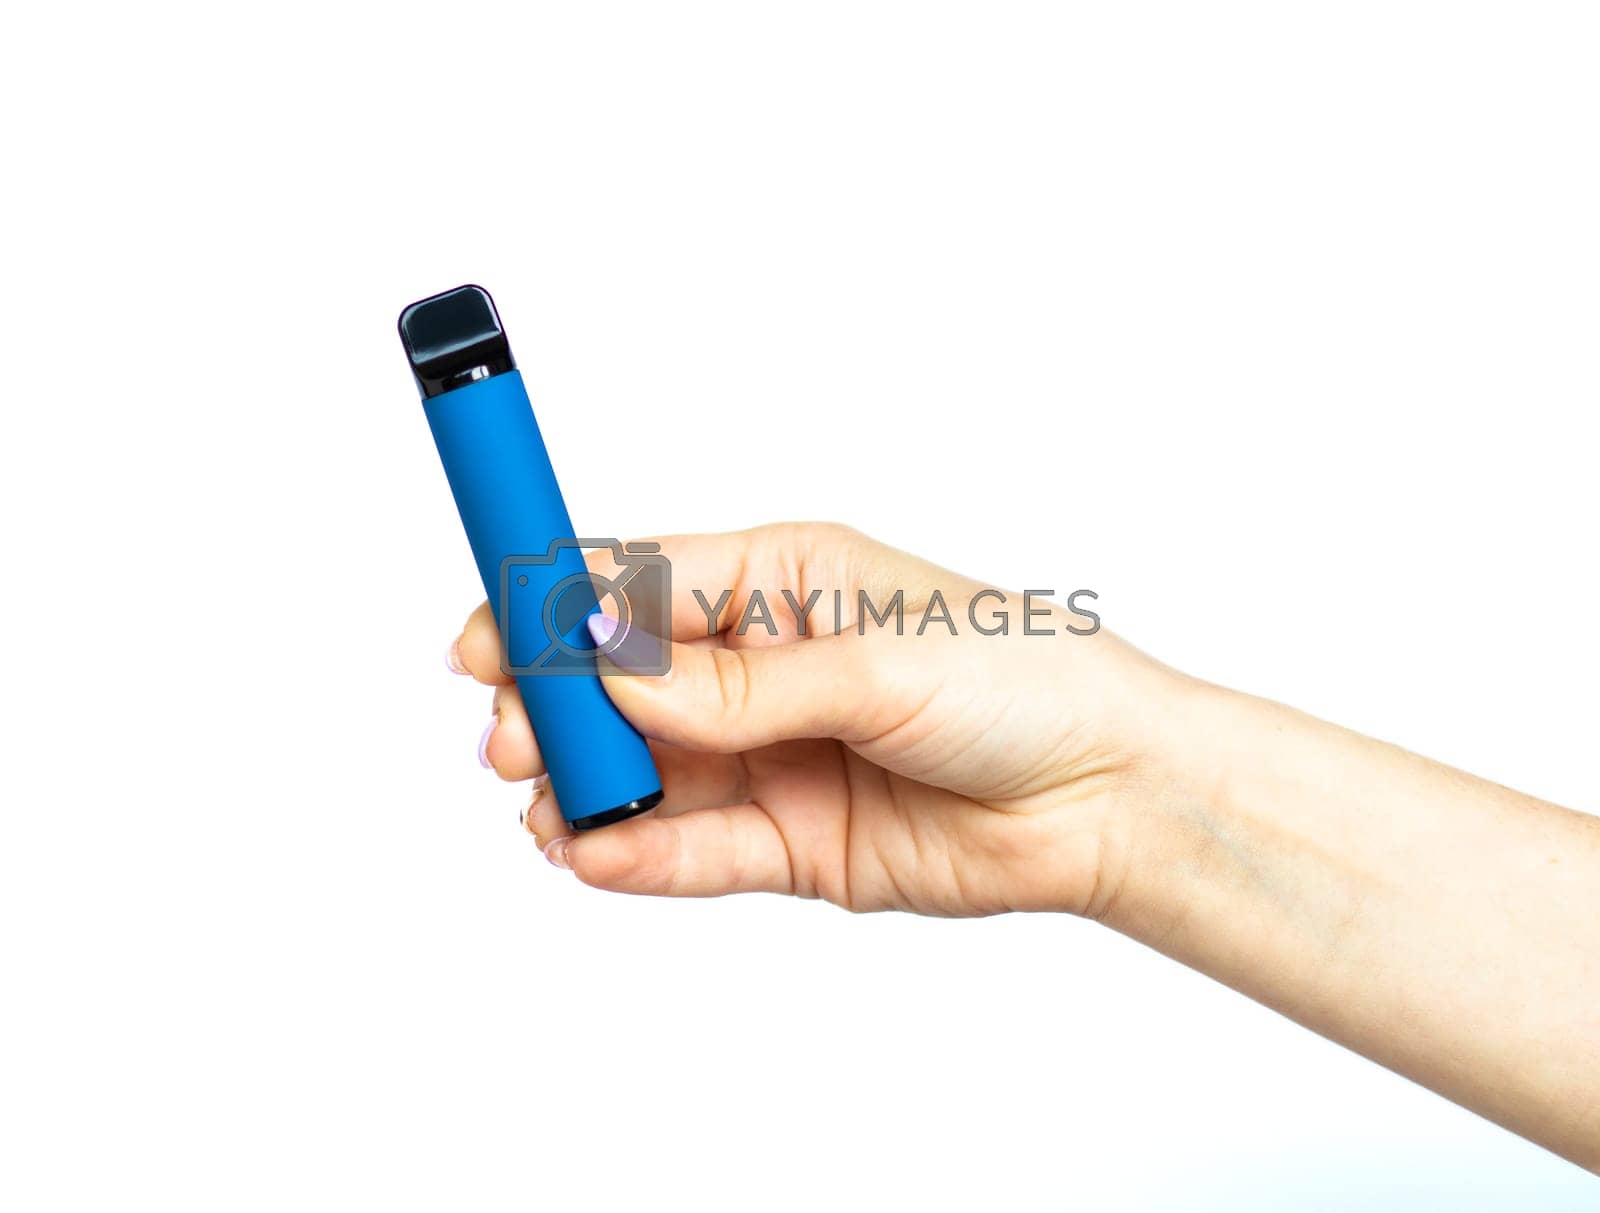 Royalty free image of Disposable electronic cigarette. The concept of modern smoking, vaping, nicotine by Suietska